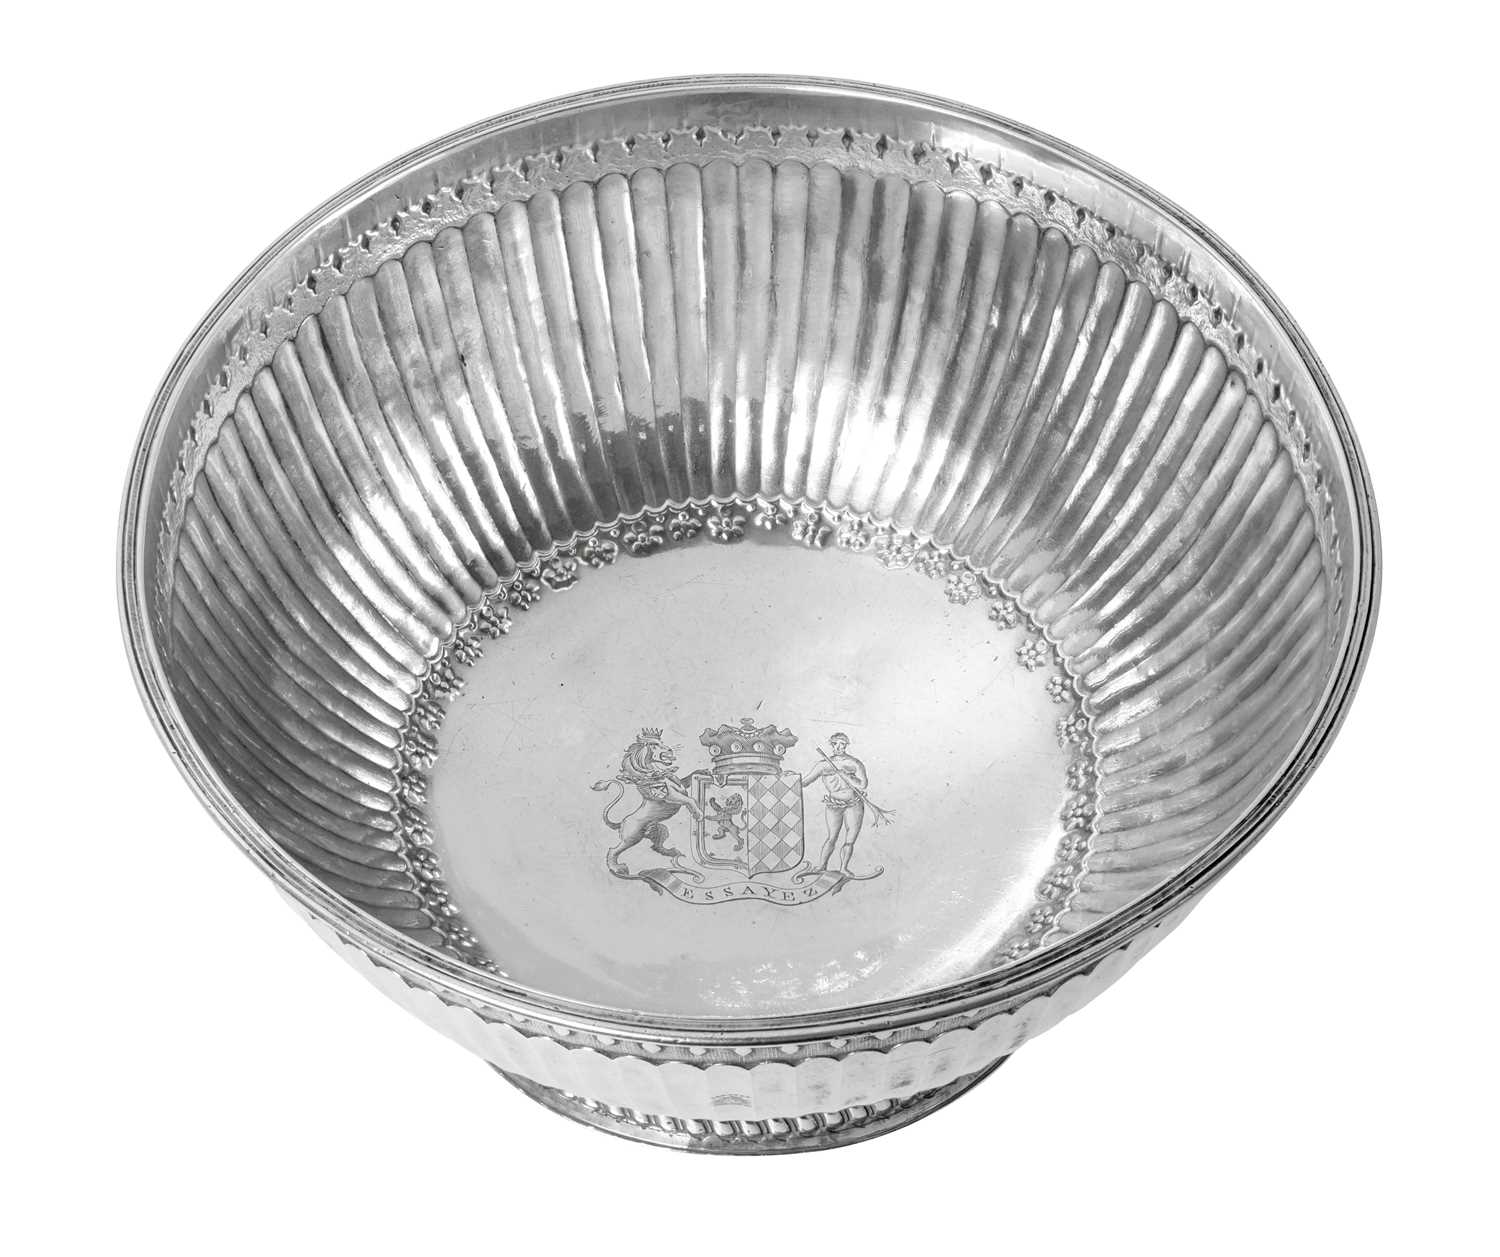 A William III Silver Punch-Bowl, by Benjamin Pyne, London, 1697 - Image 2 of 6